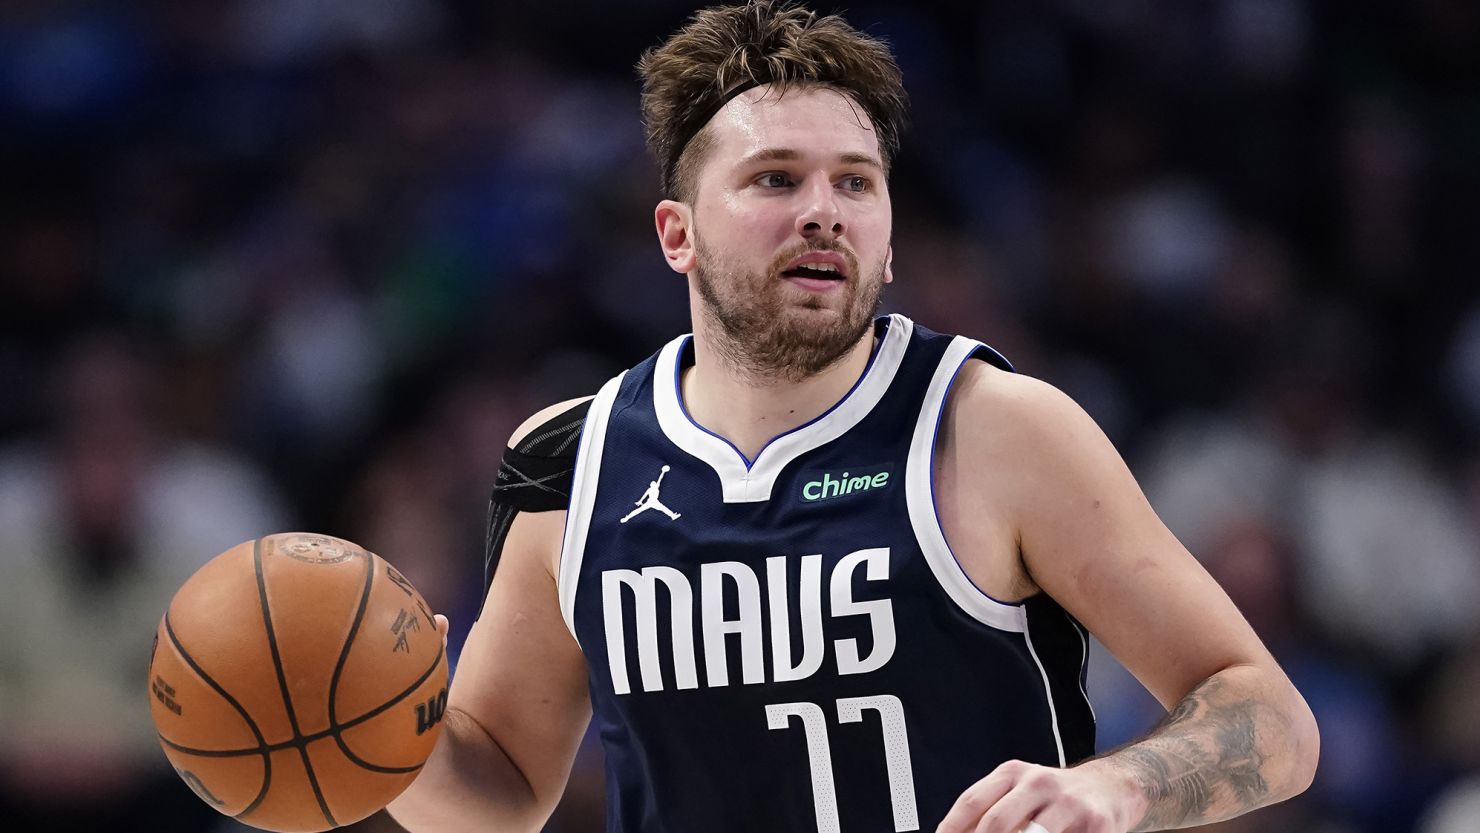 Luka Doncic of the Mavericks Becomes the First Player to Post These Numbers Since Lebron James